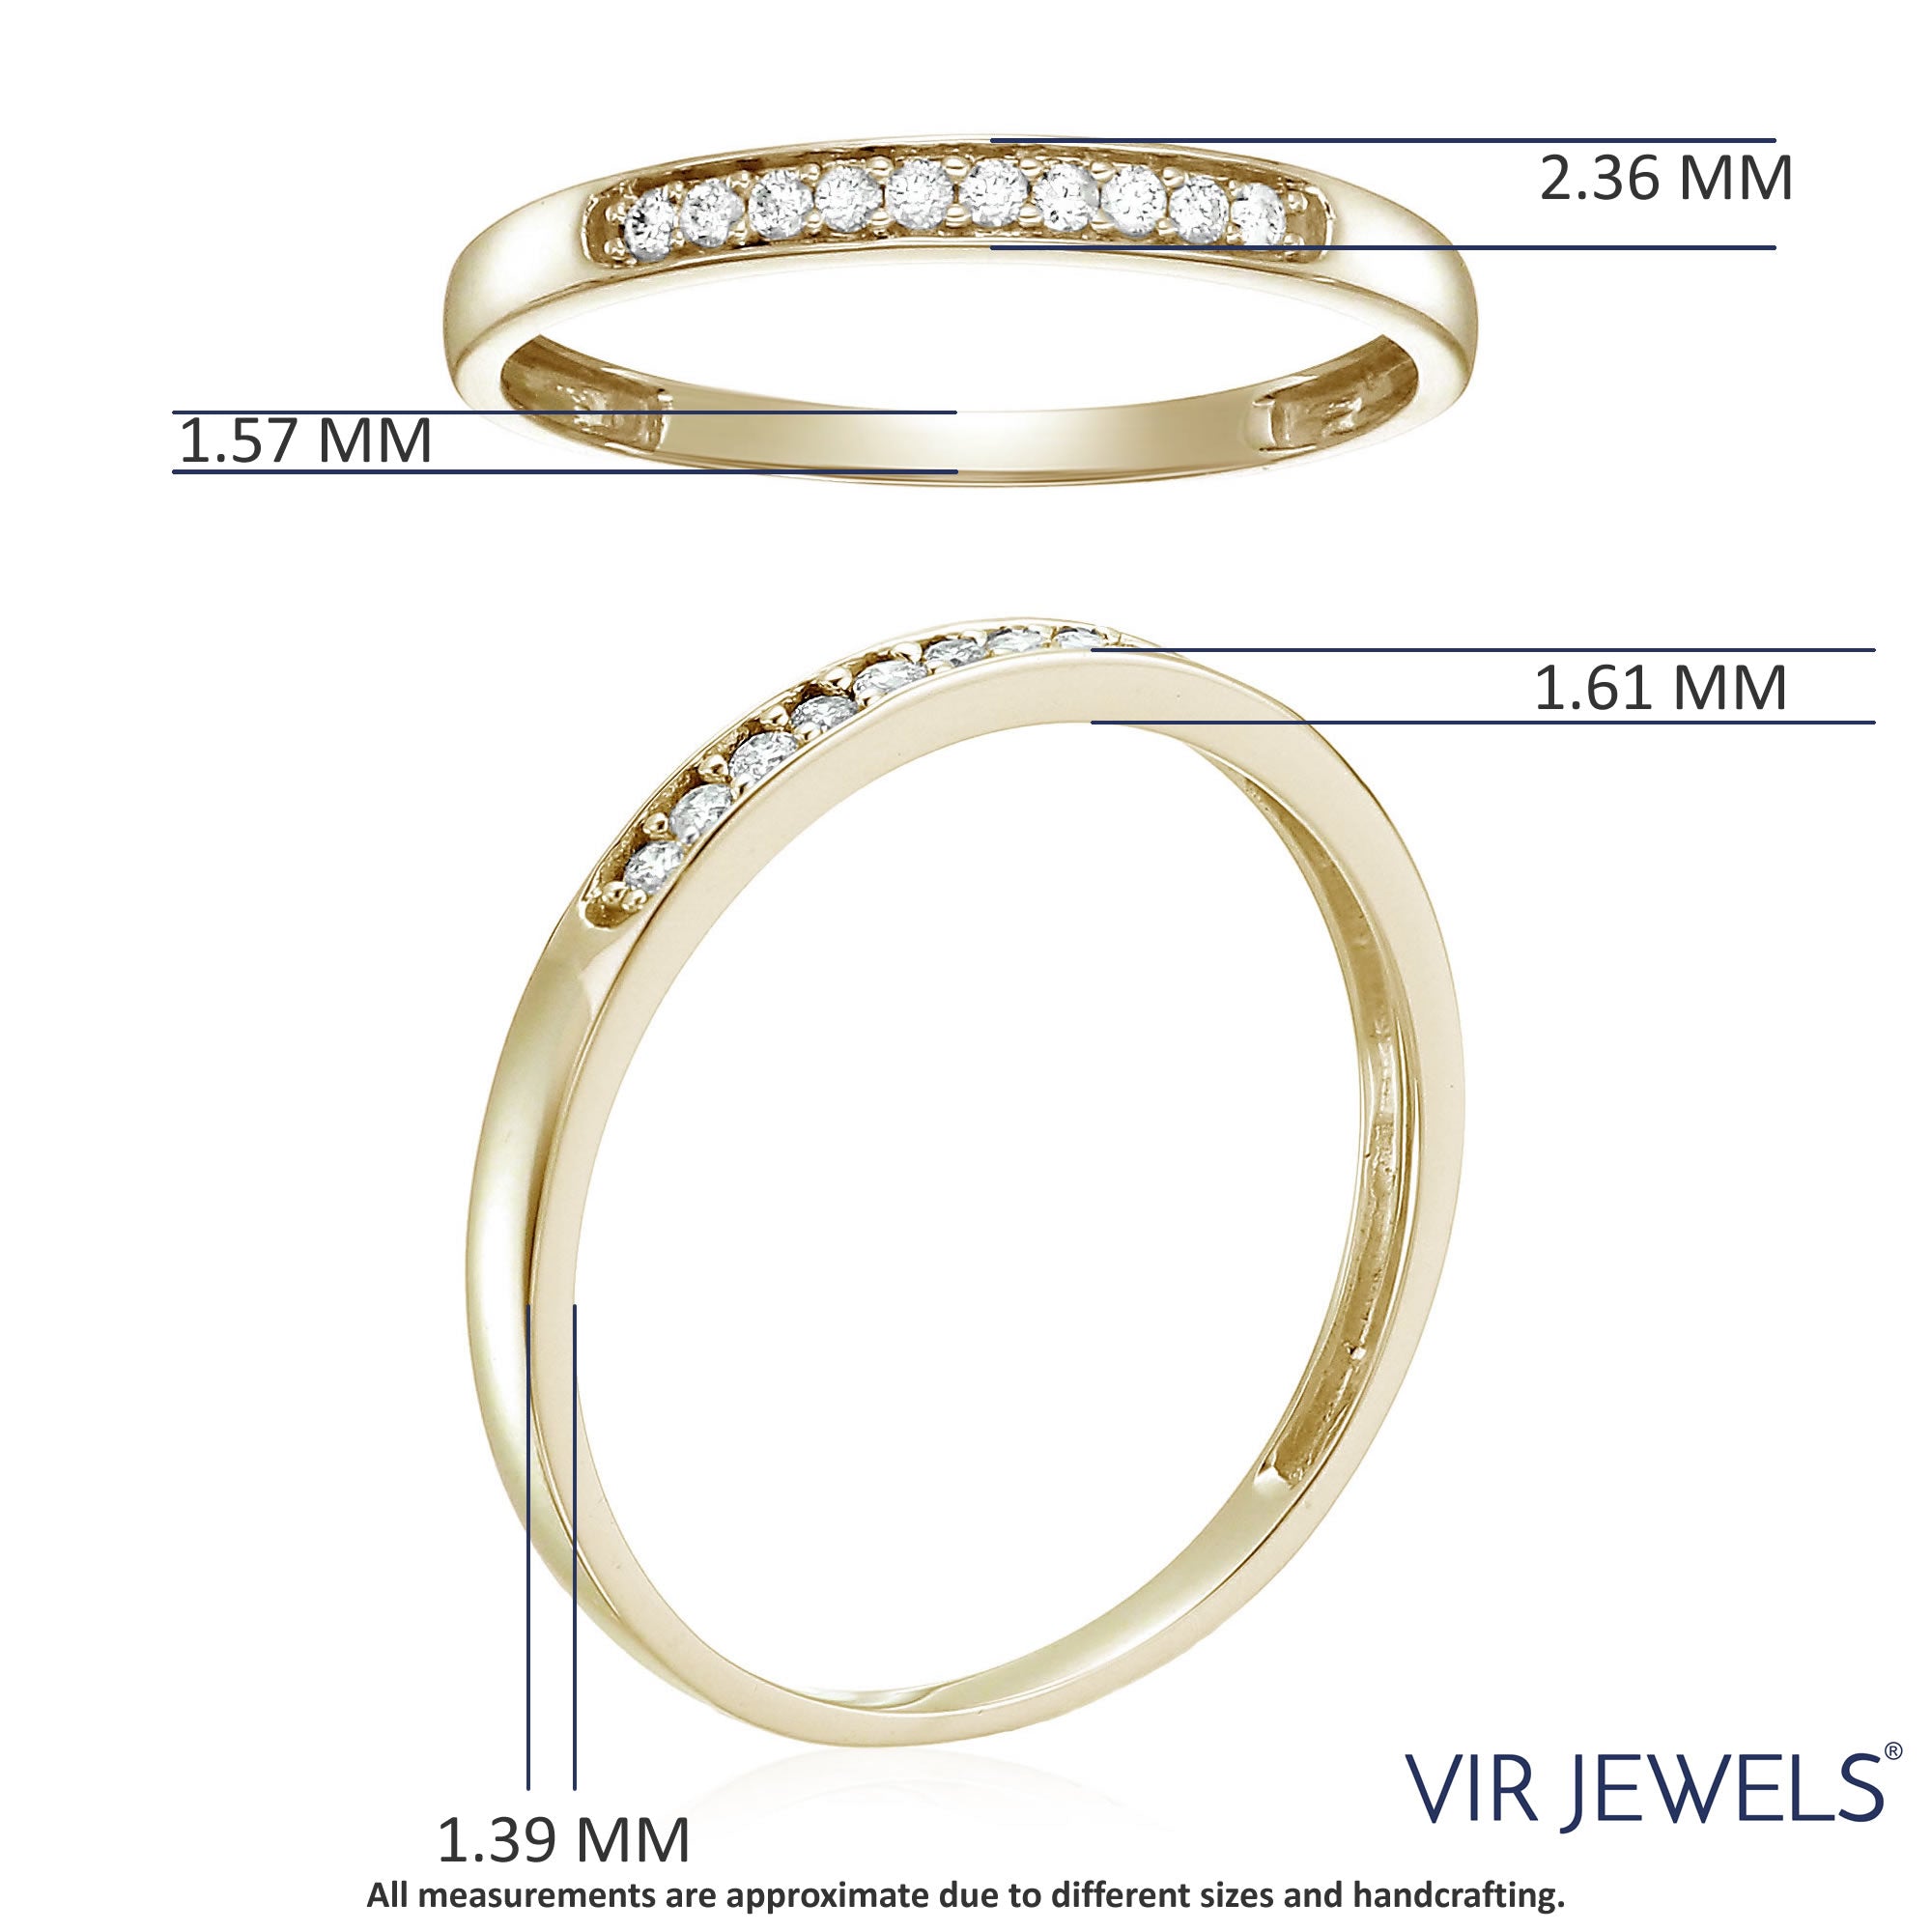 1/10 cttw Diamond Wedding Band for Women, 10K Yellow Gold Wedding Band with 10 Stones Prong Set, Size 4.5-10